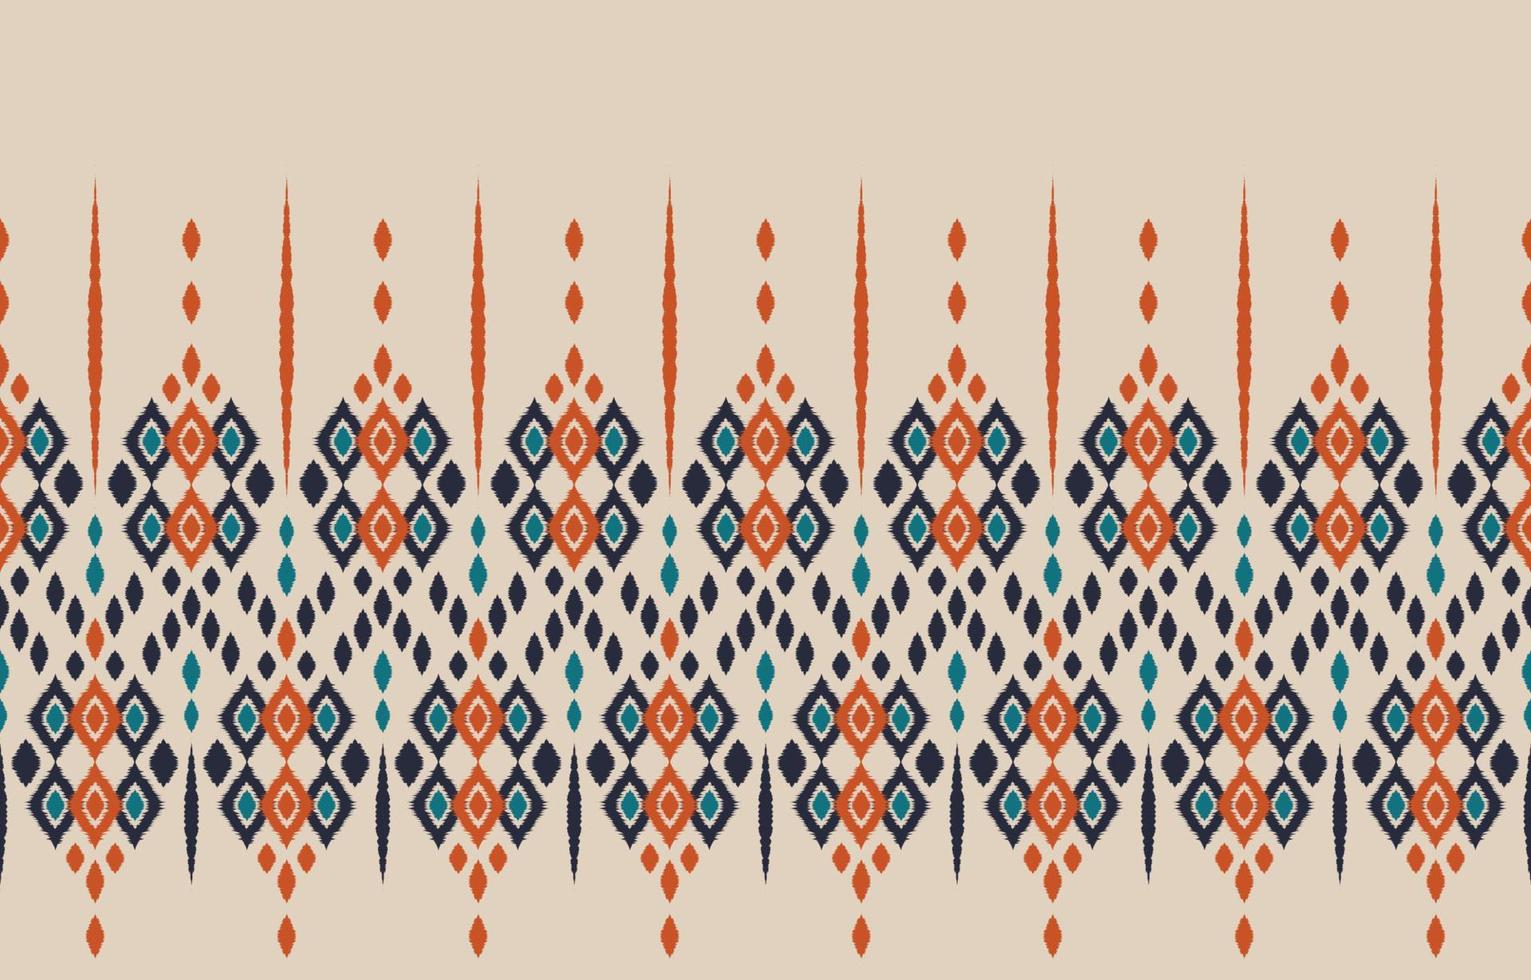 Beautiful Ethnic abstract ikat art. Seamless pattern chevron in tribal, folk embroidery rhombus, and Mexican style. Aztec geometric art ornament print. Design for carpet, wallpaper, wrapping. vector